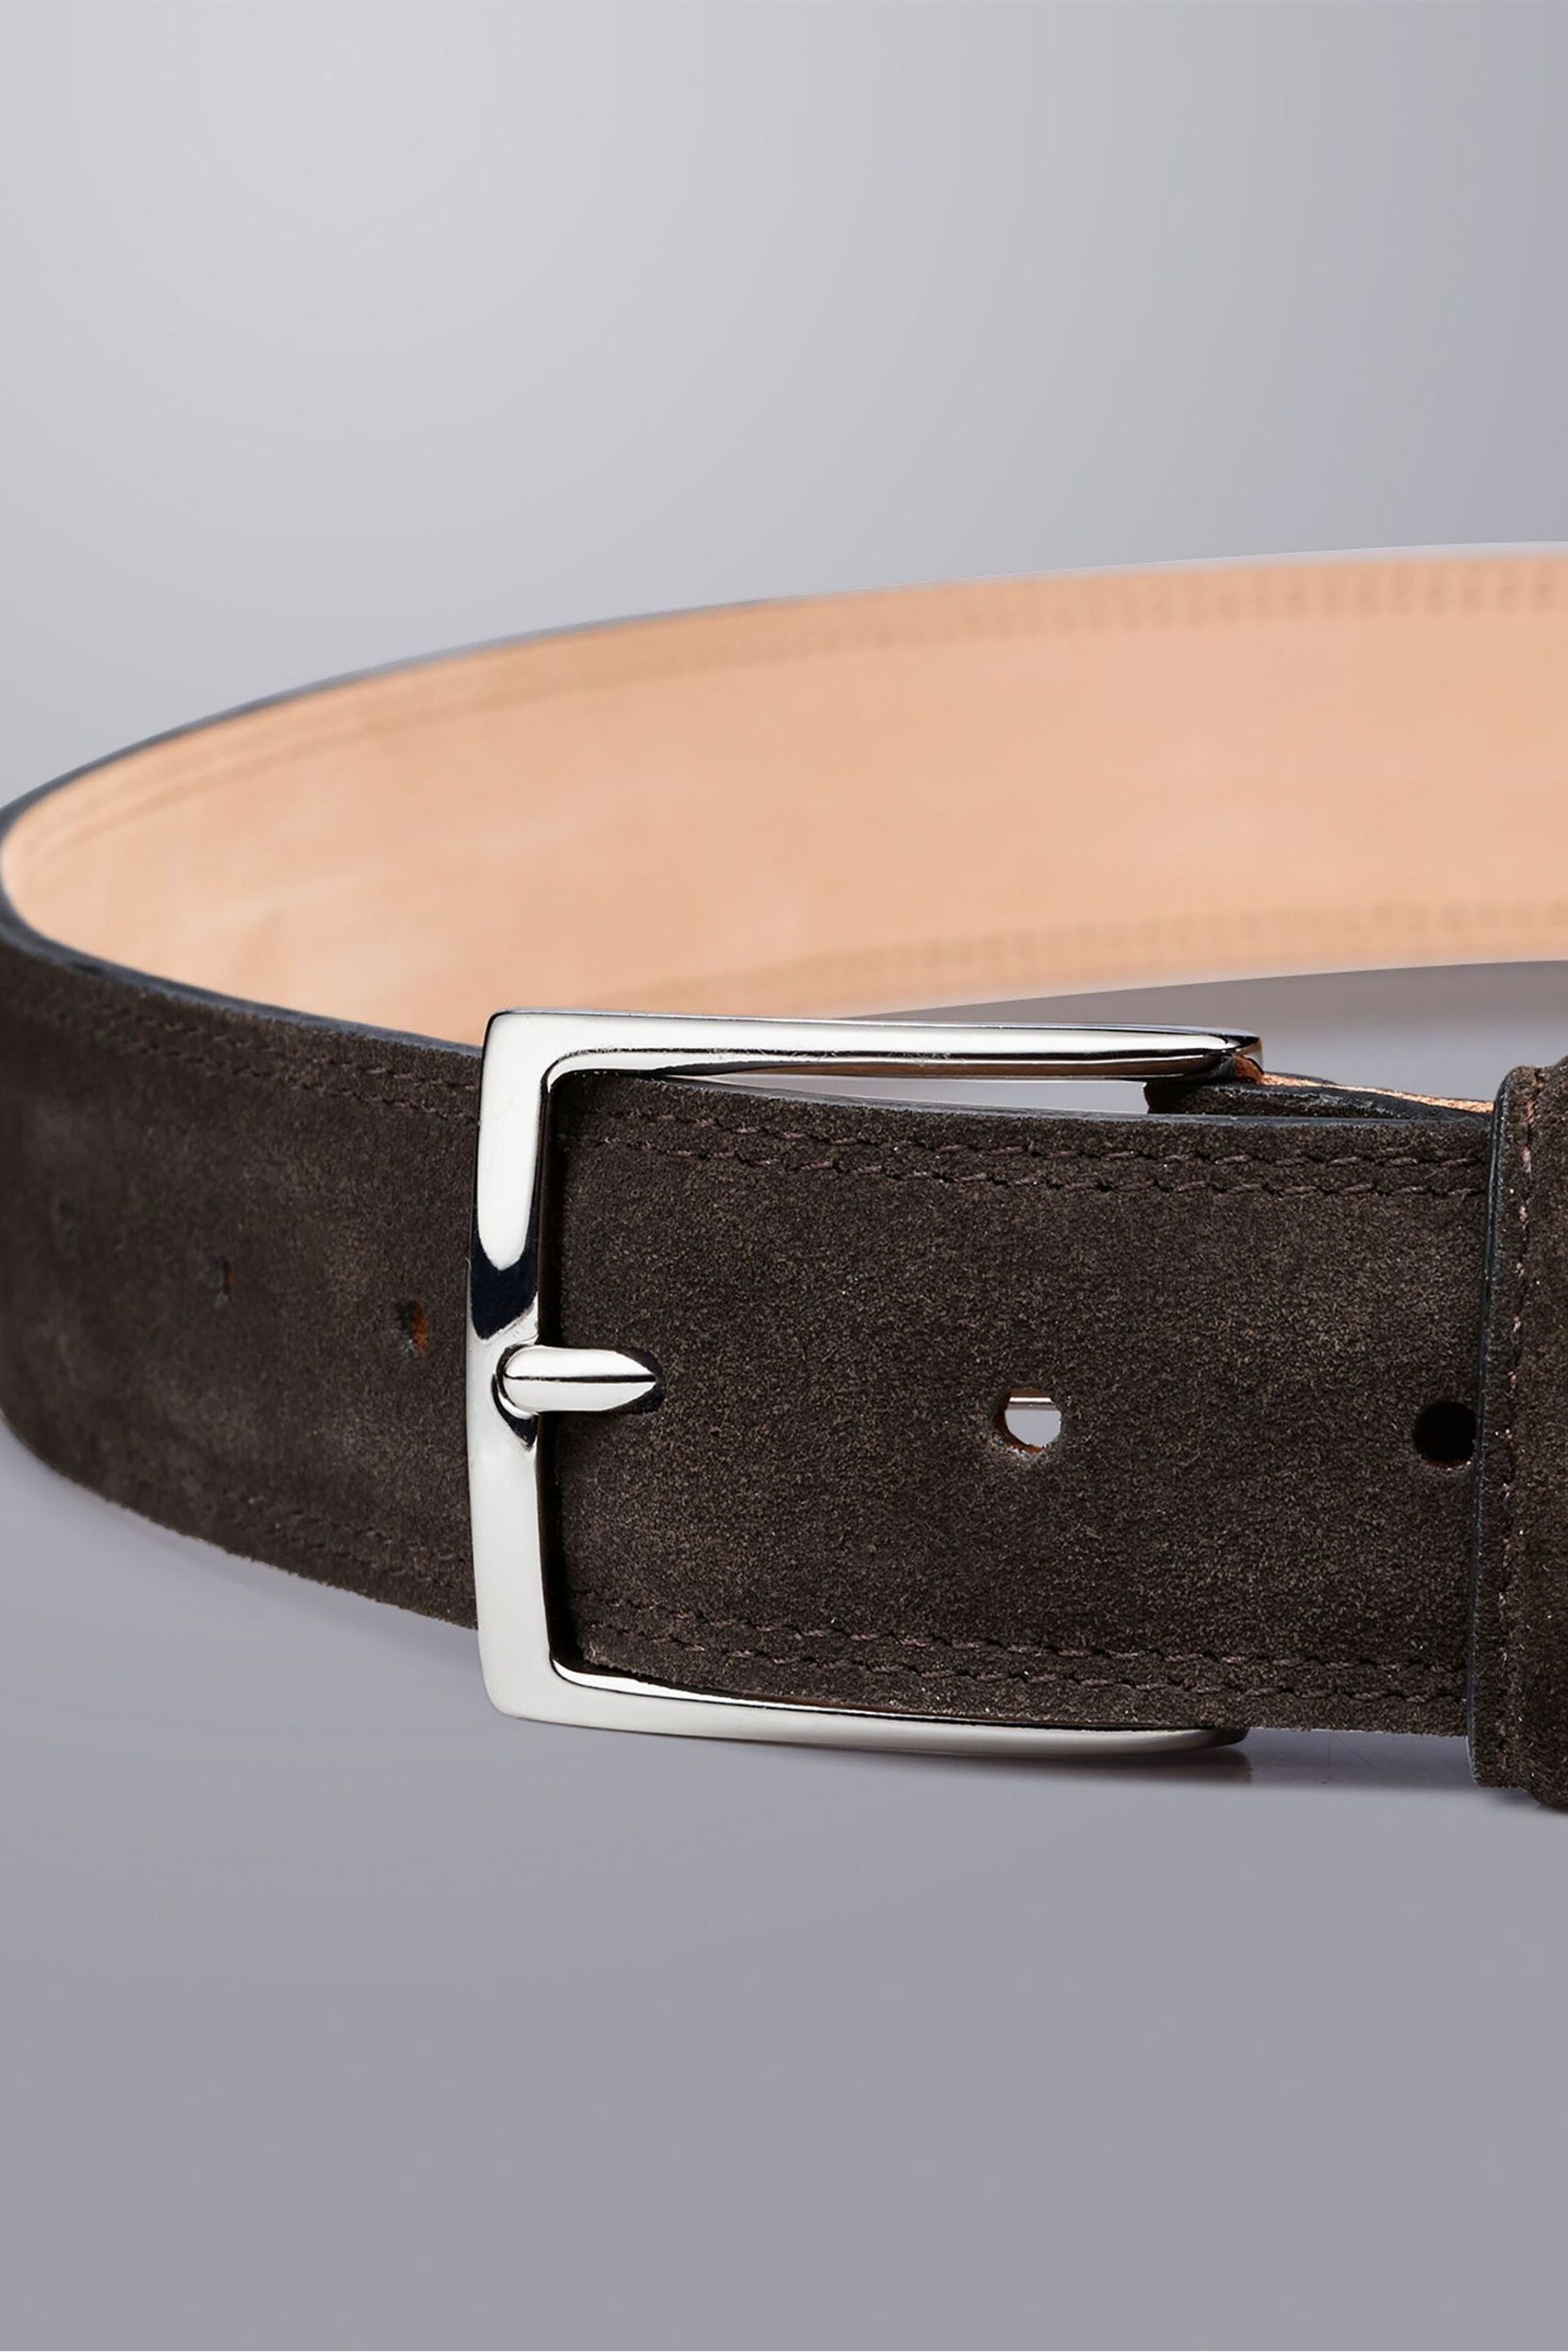 Charles Tyrwhitt Brown Suede Made In England Belt - Image 1 of 3